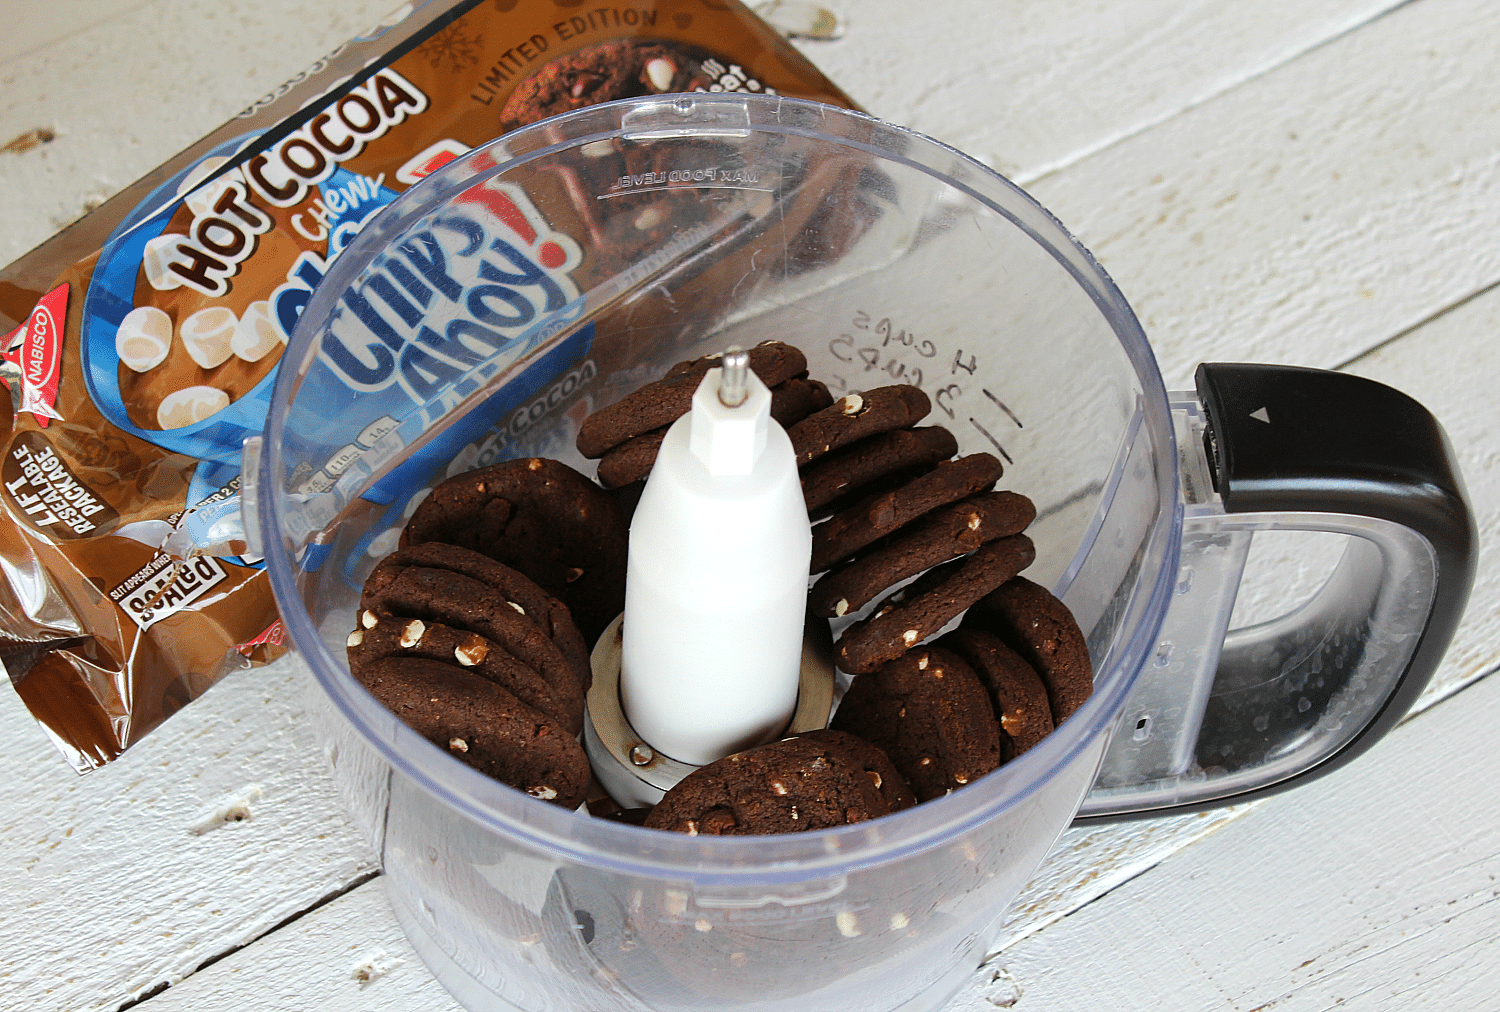 Place the entire package of hot cocoa cookies in food processor.